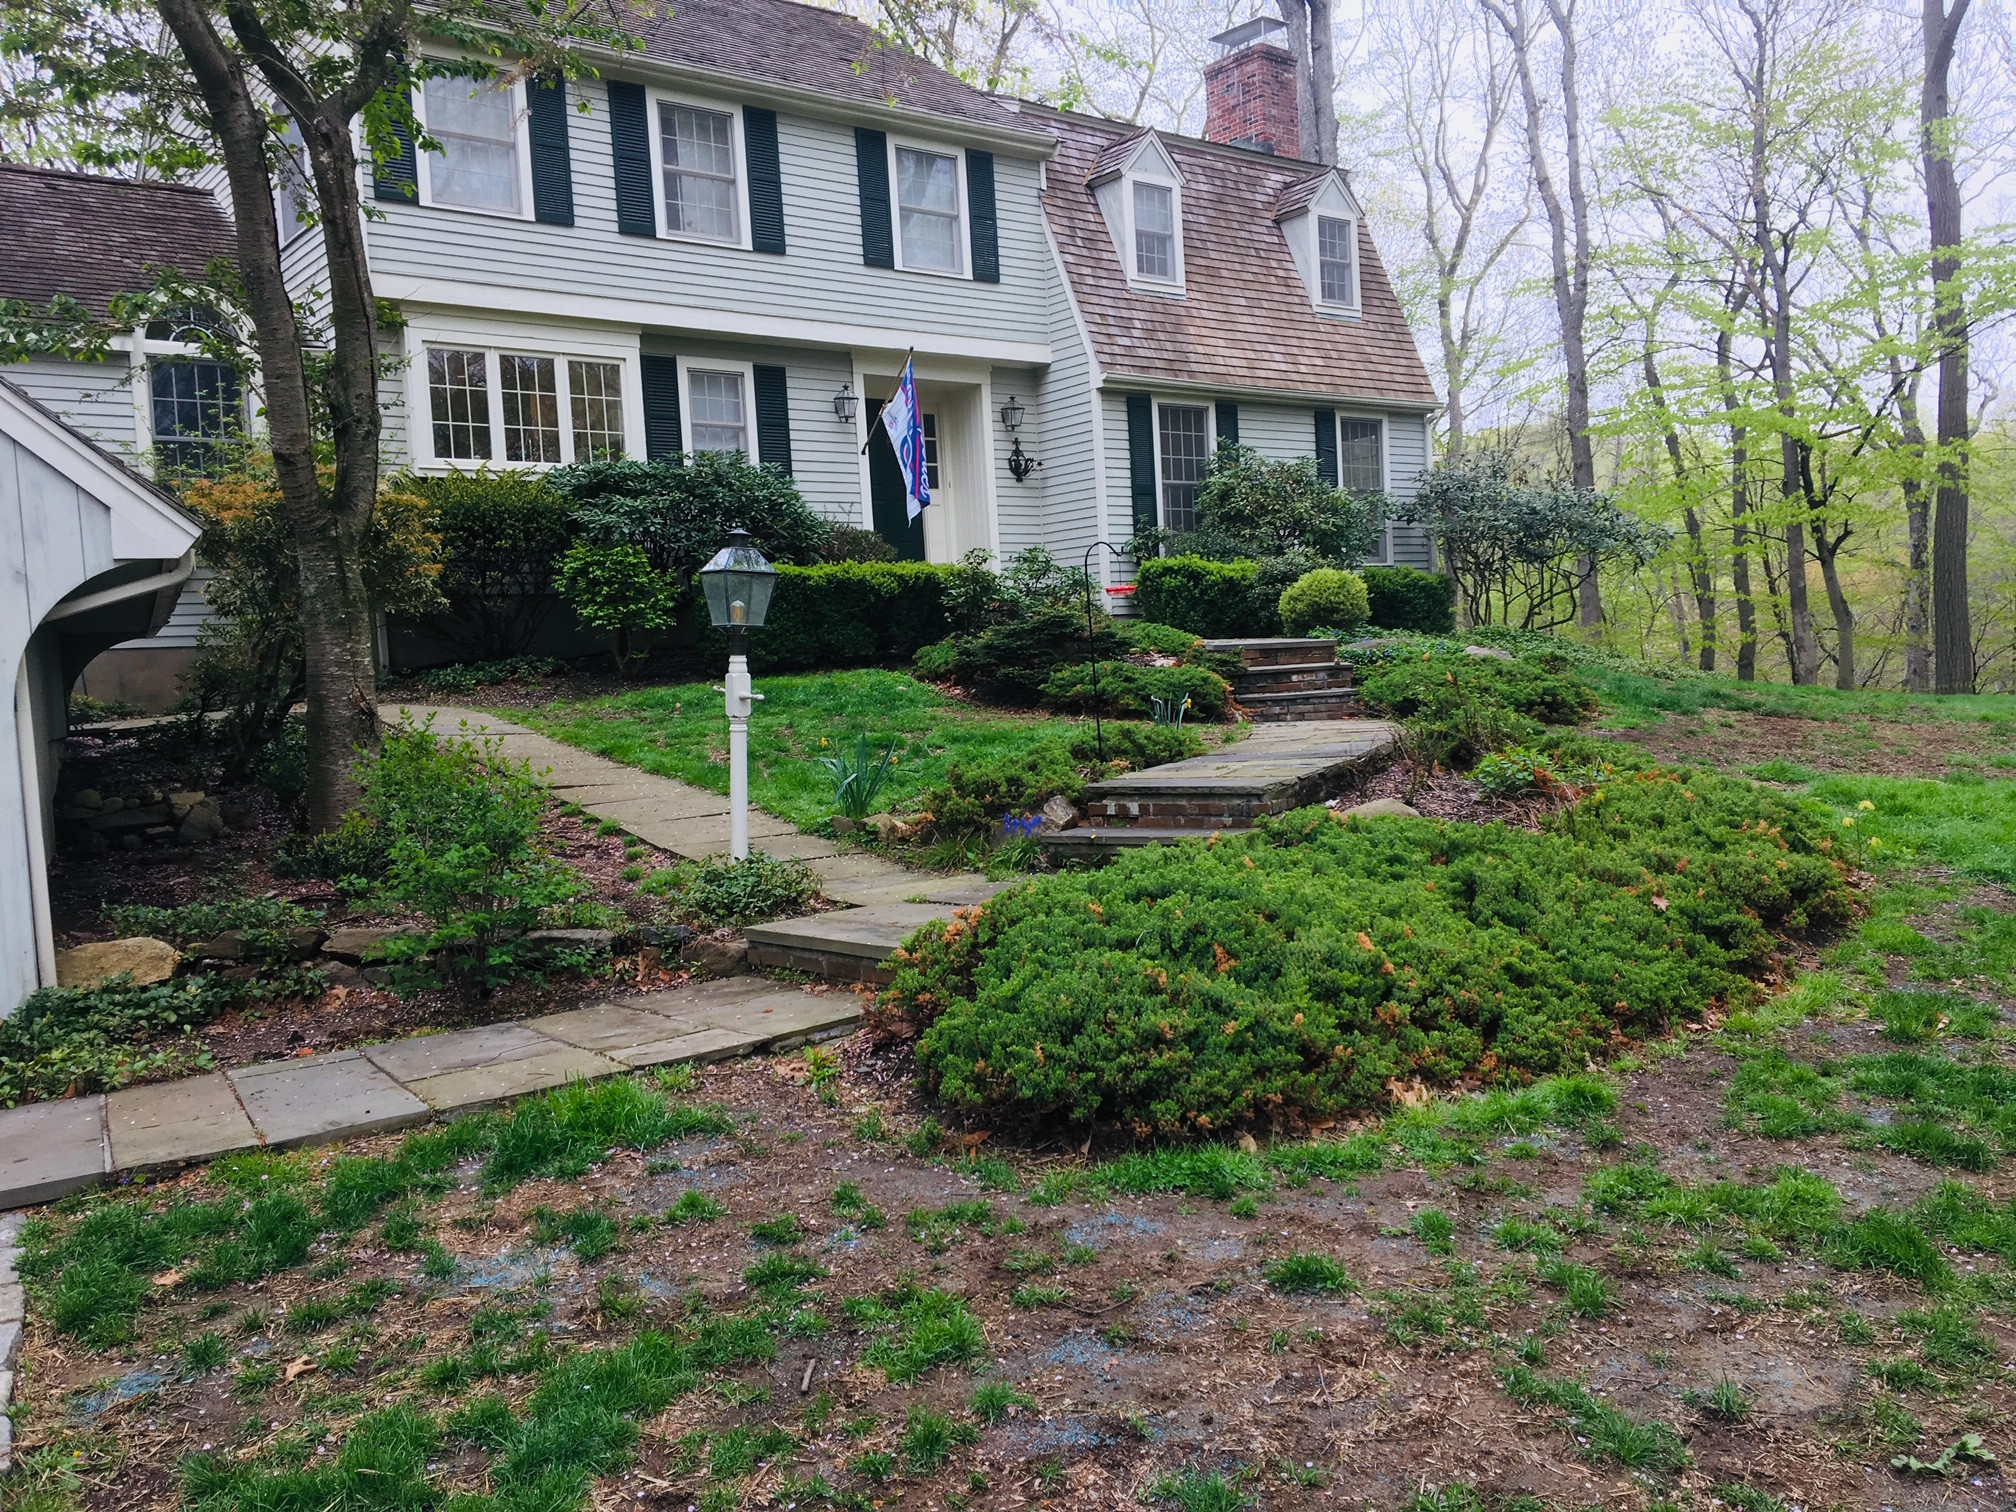 PROPERTY IN COS COB ASKED TO MODIFY THE FRONT ENTRANCE WALKWAY